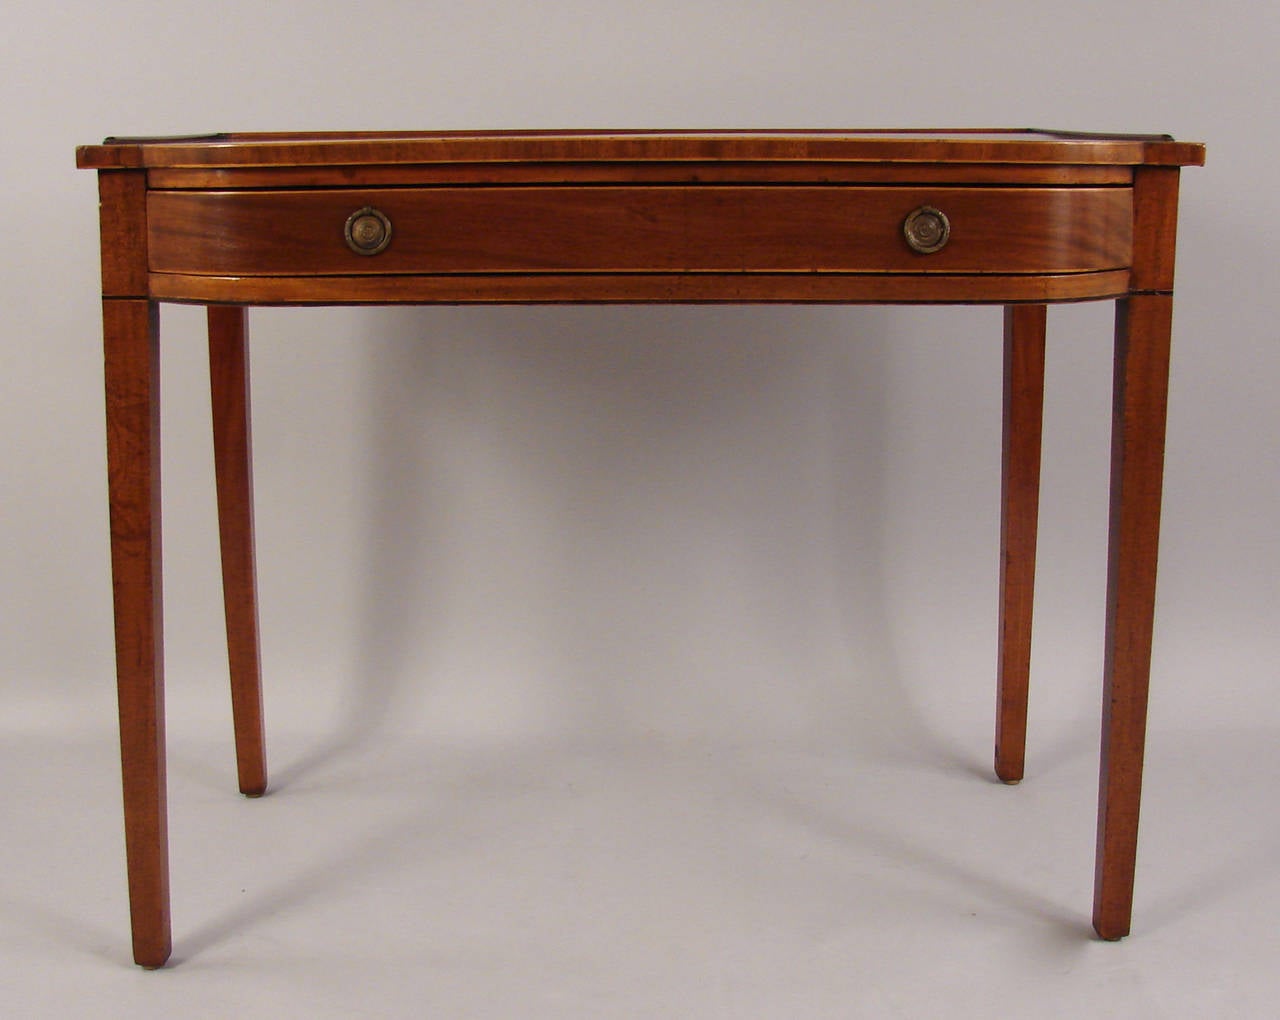 English Pair of George III Mahogany Inlaid Console Tables